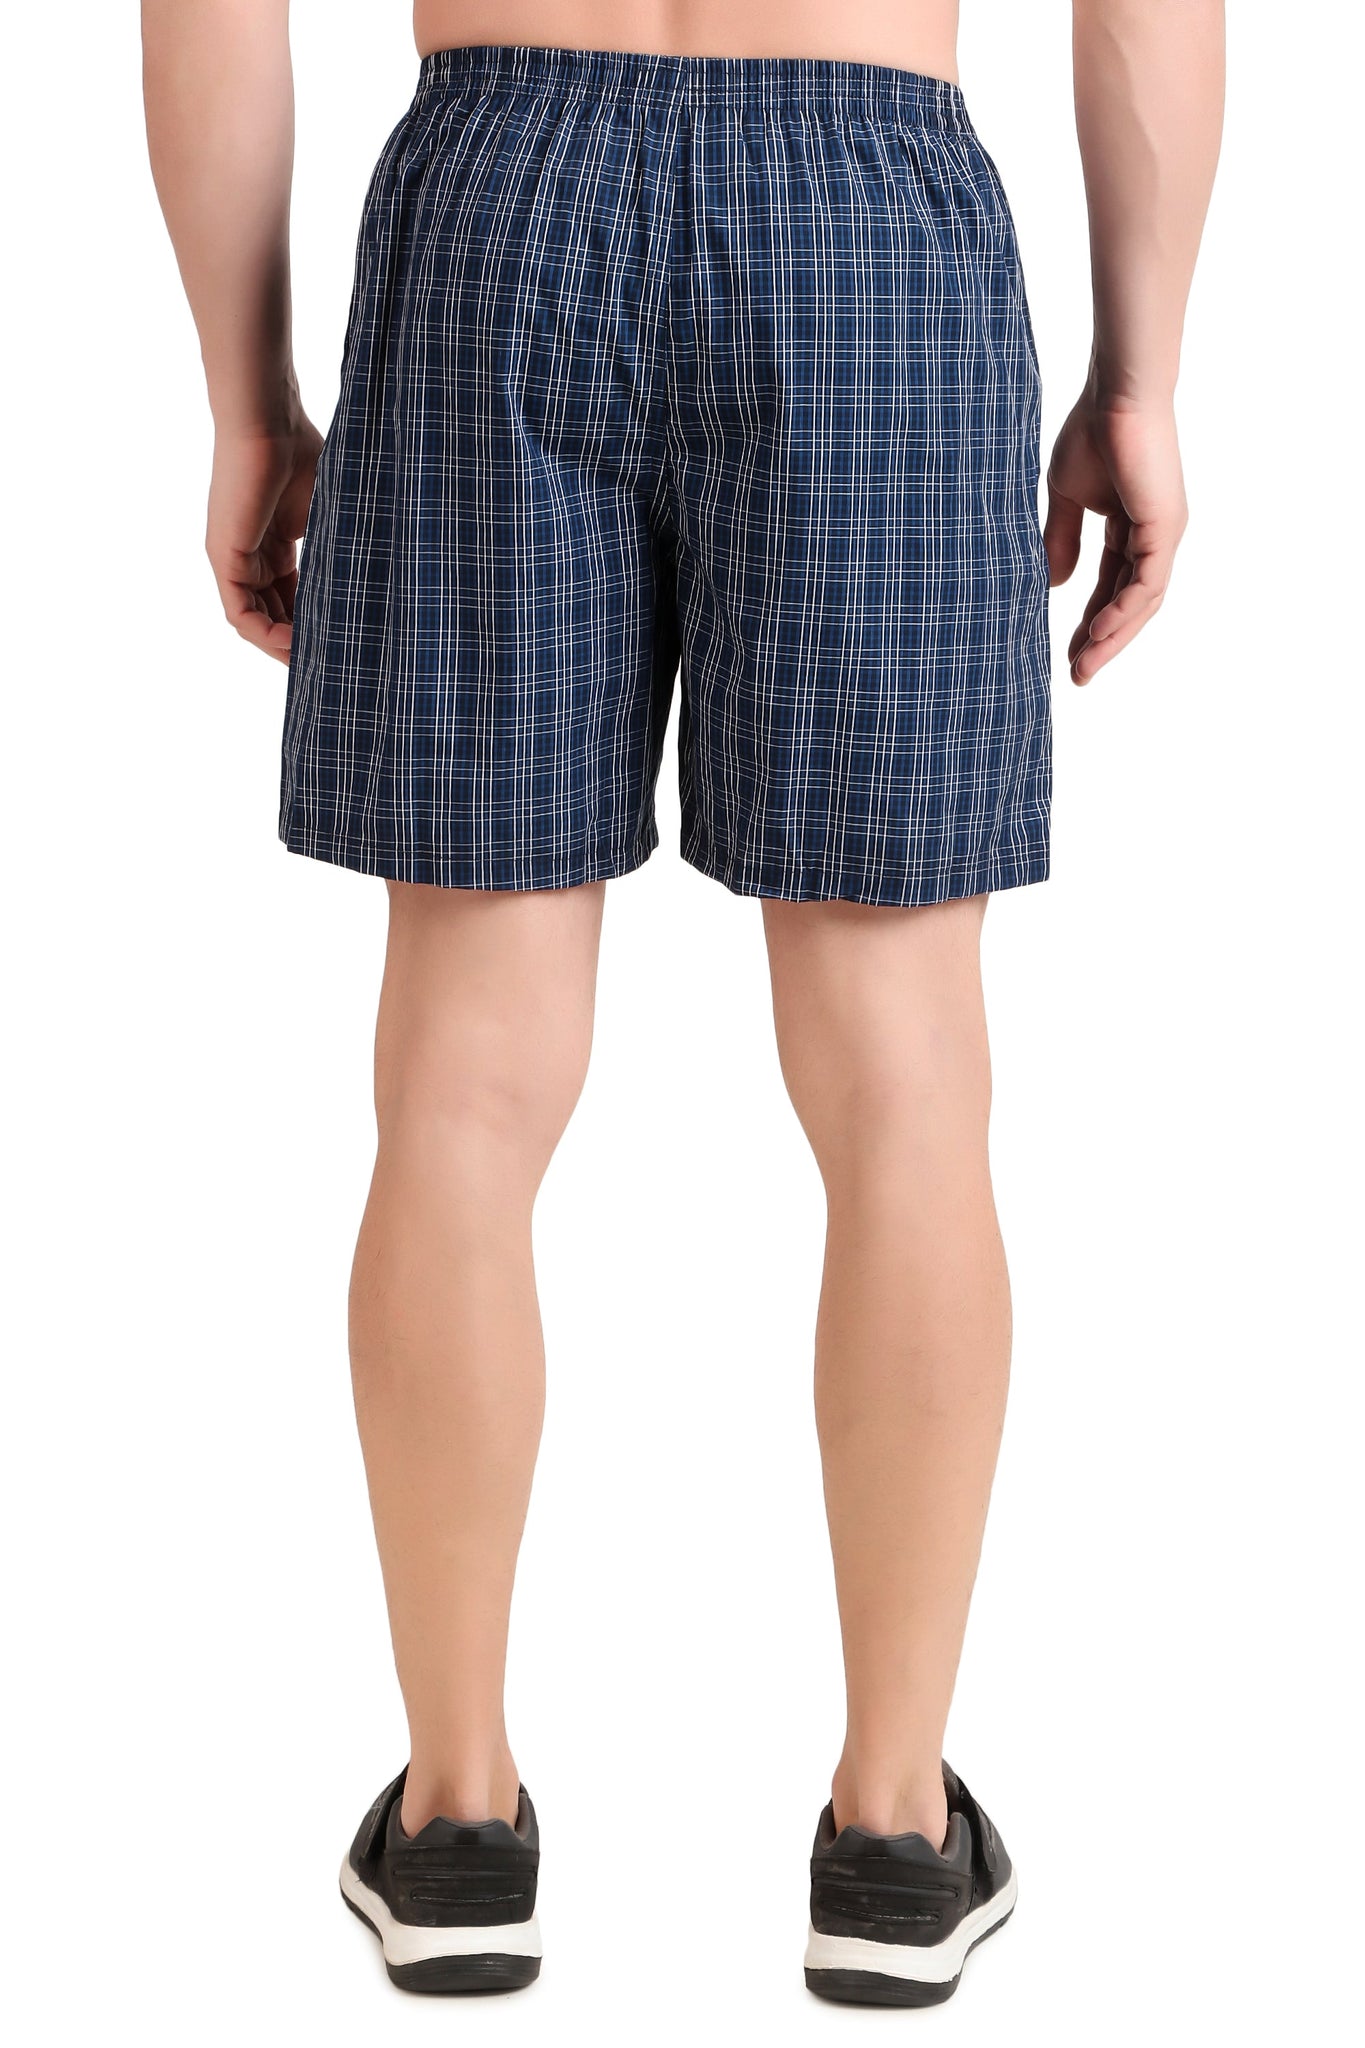 Jockey-1223 Super Combed Mercerized Cotton Woven Checkered Boxer Shorts with Side Pocket